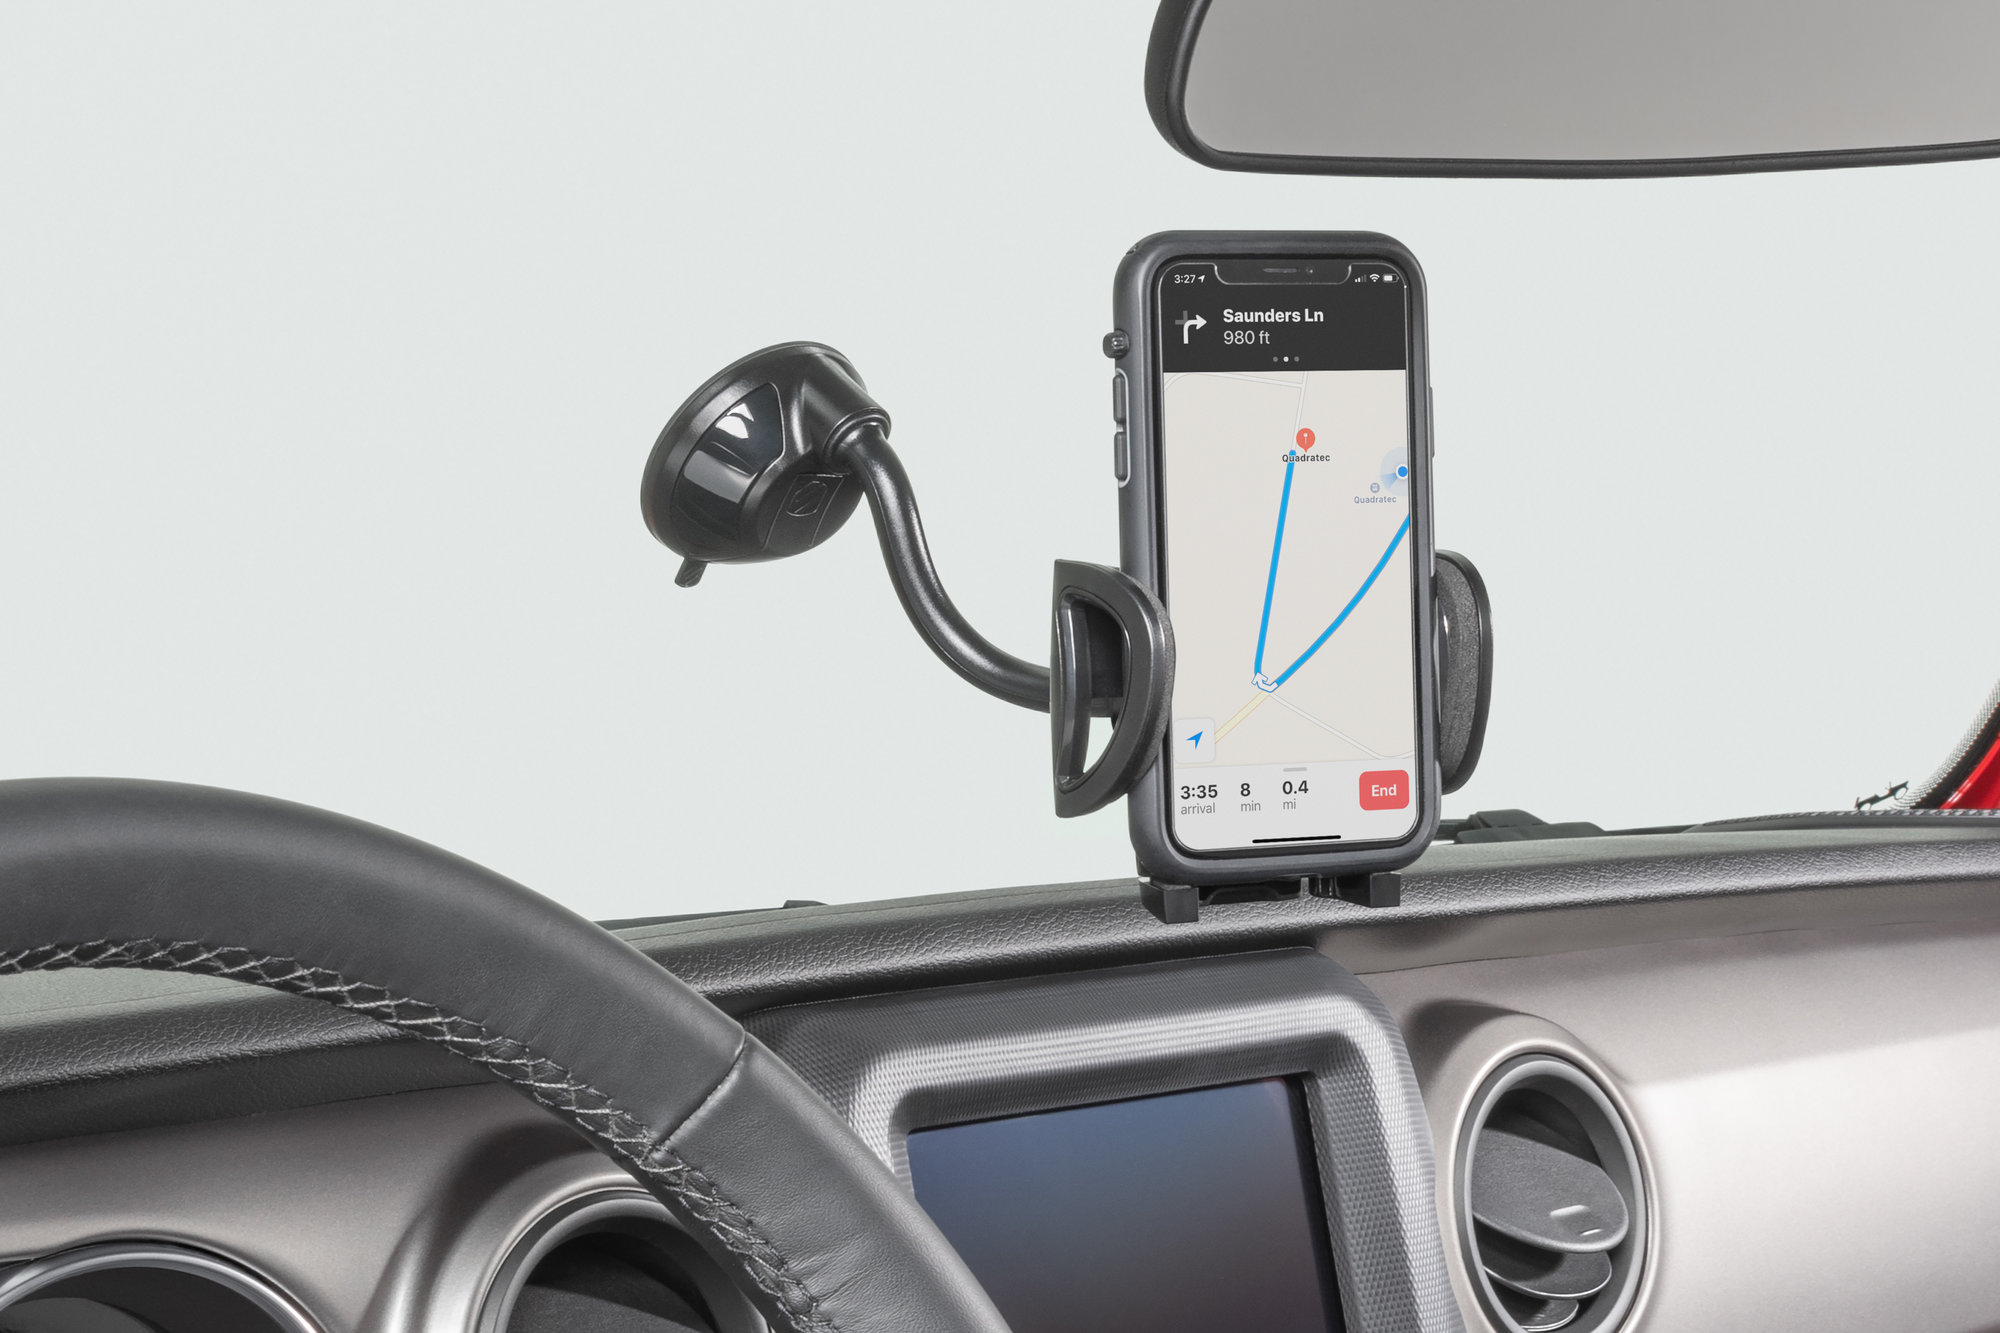 Scosche 3-in-1 Universal Car Mount, Suction Cup Mount for Mobile Devices